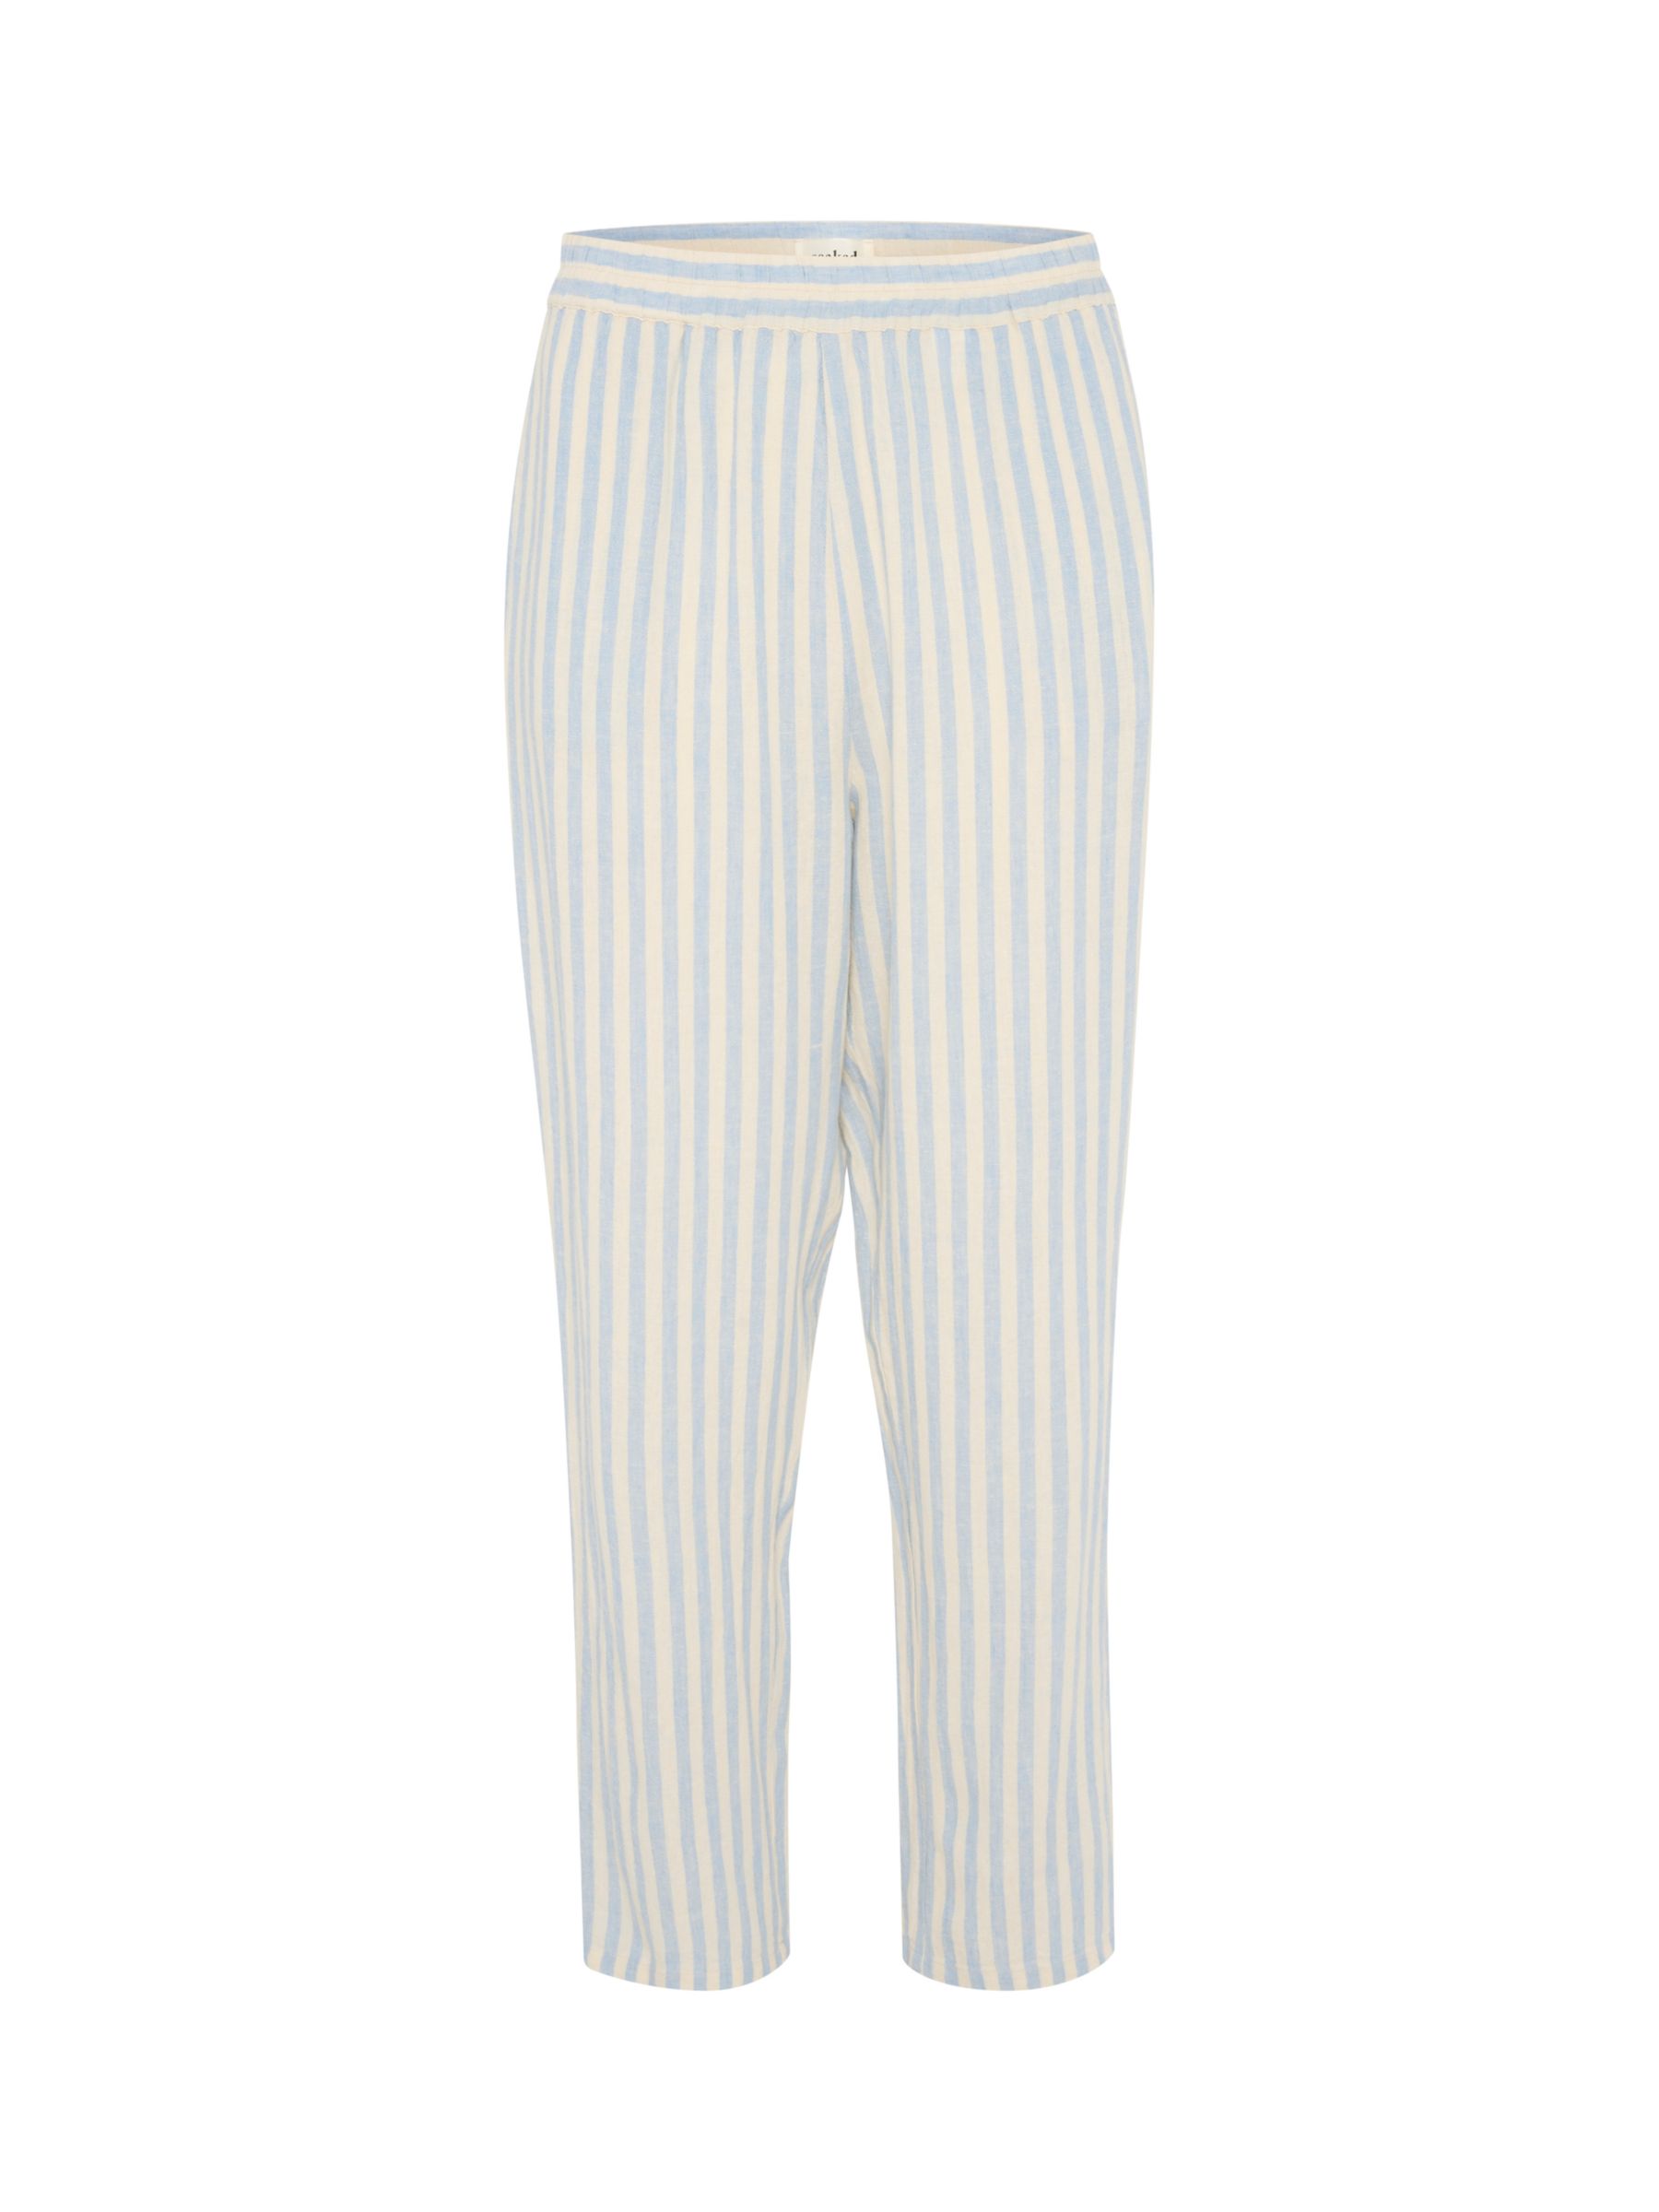 Buy Soaked In Luxury Belira Cropped Leg Casual Trousers Online at johnlewis.com